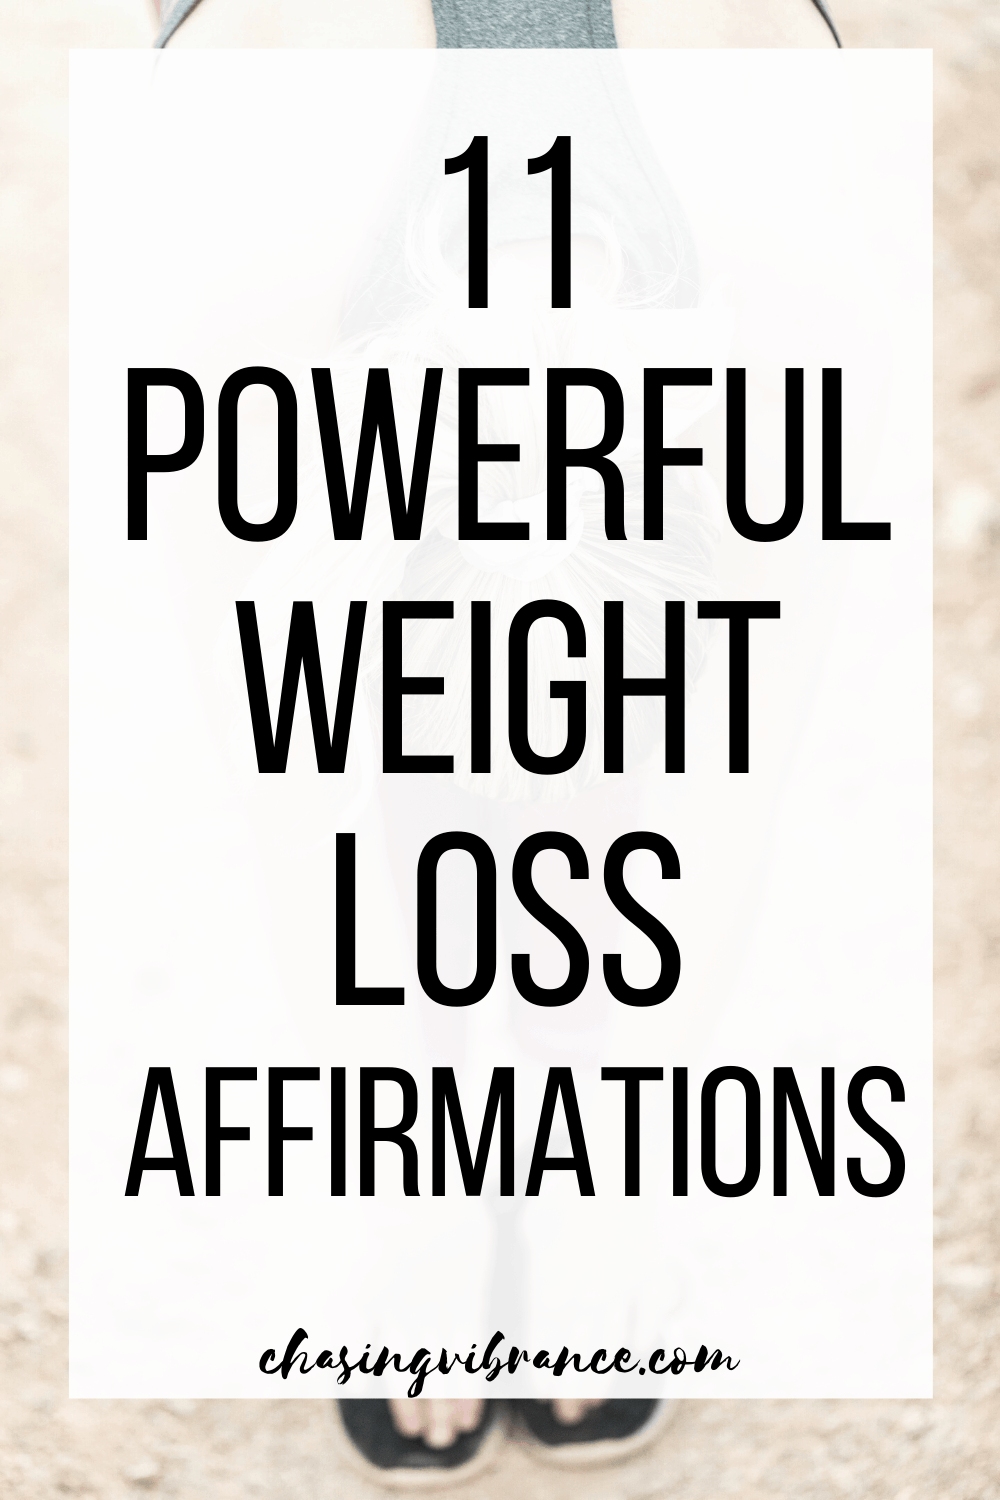 15 Positive Affirmations for Weight Loss